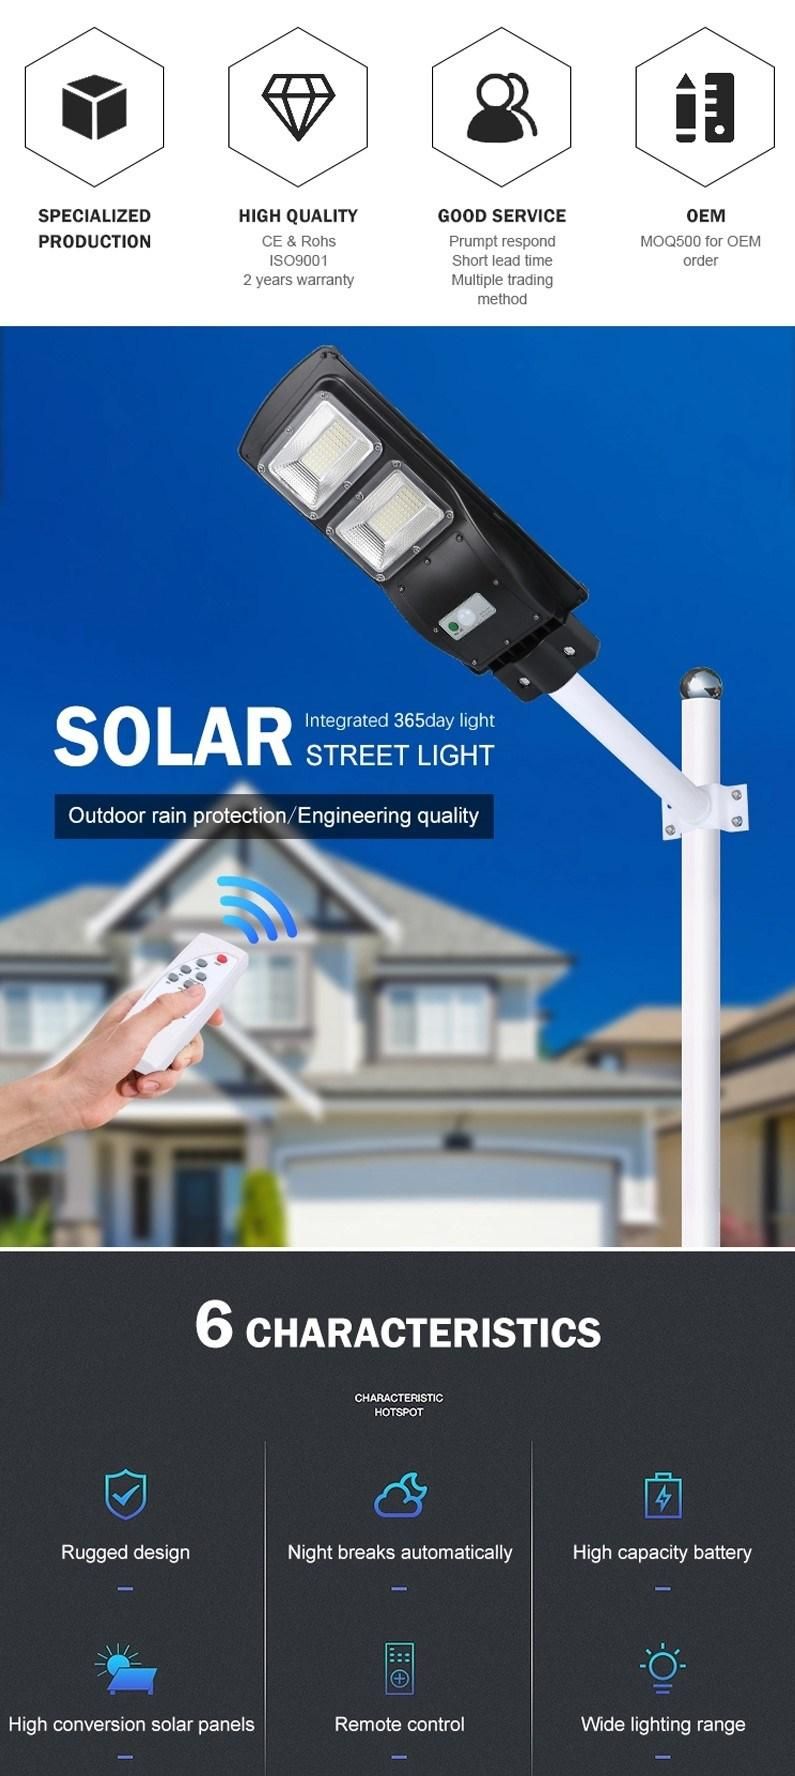 60W IP65 Waterproof ABS Solar LED All in One Street Lighting, 30W 60W 90W 120W Bright Smart LED Square Lights Solar System Lamps